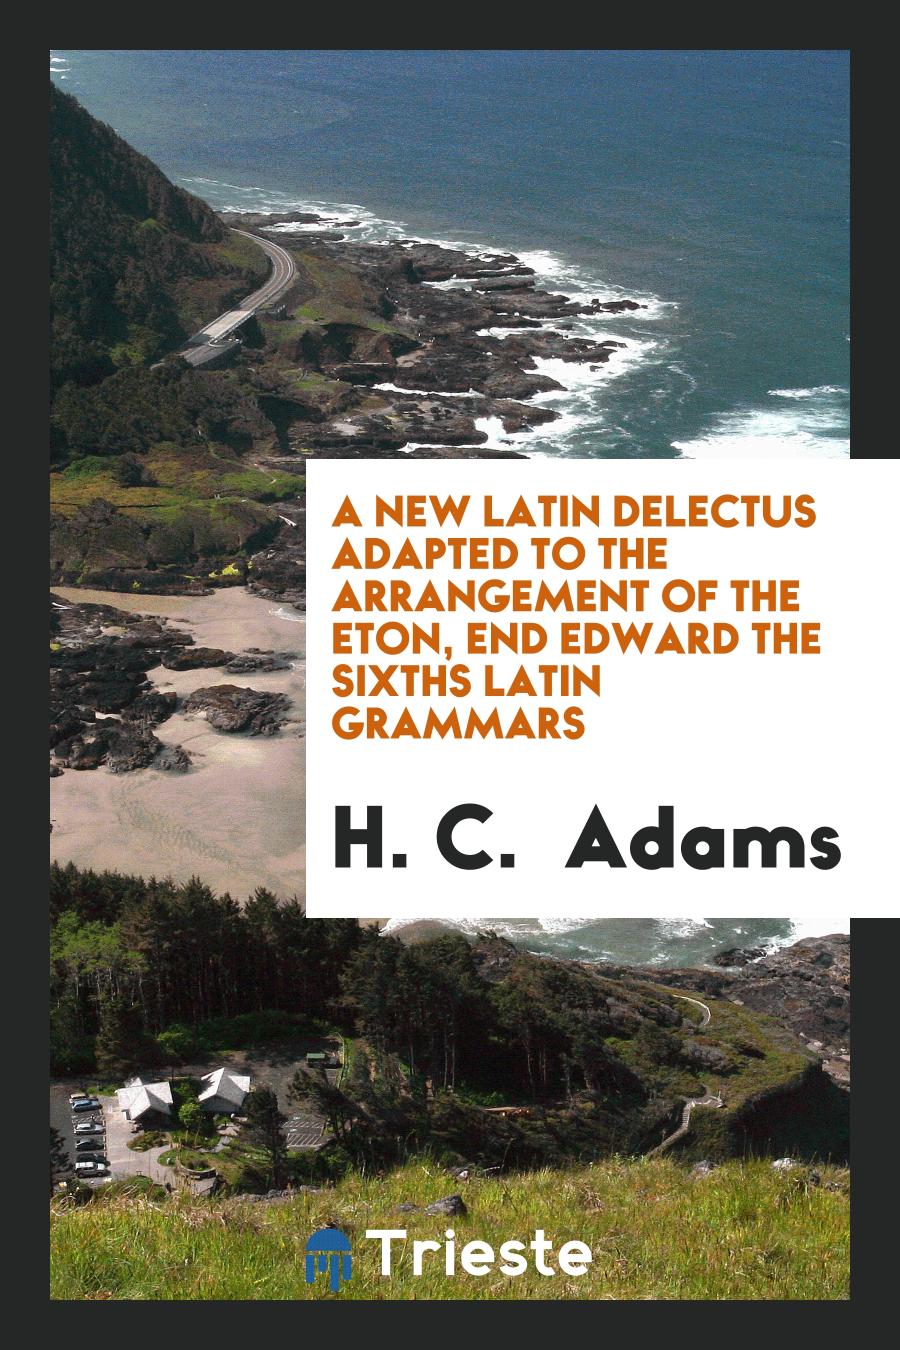 A New Latin Delectus Adapted to the Arrangement of the Eton, End Edward the Sixths Latin Grammars